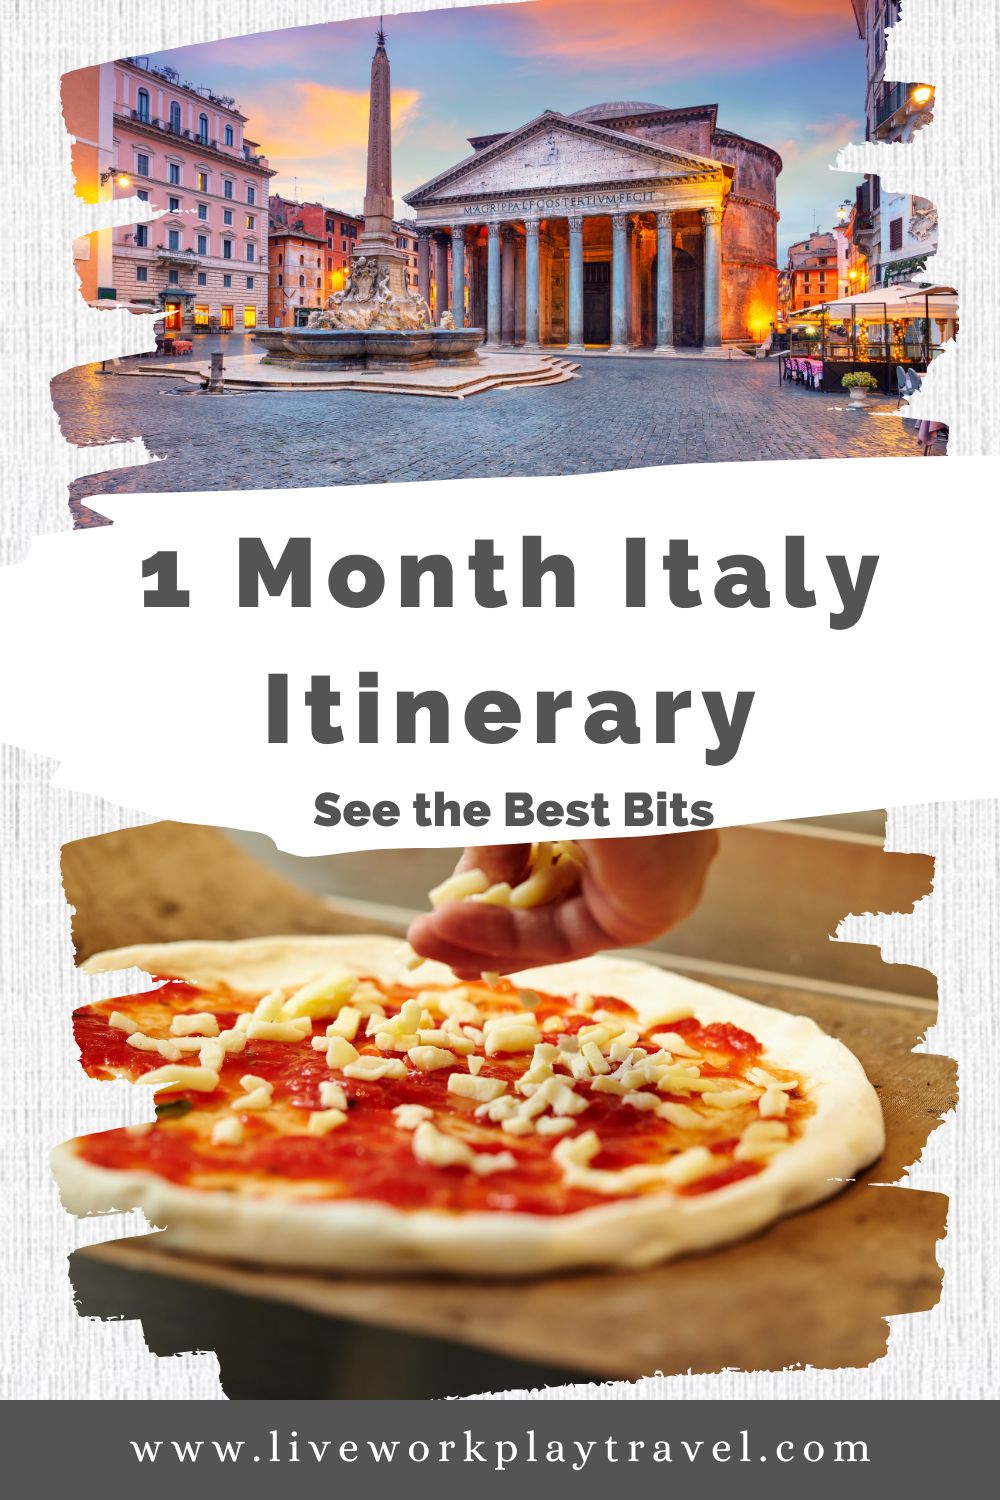 1 Month Italy Itinerary Pin. Pantheon and Pizza.